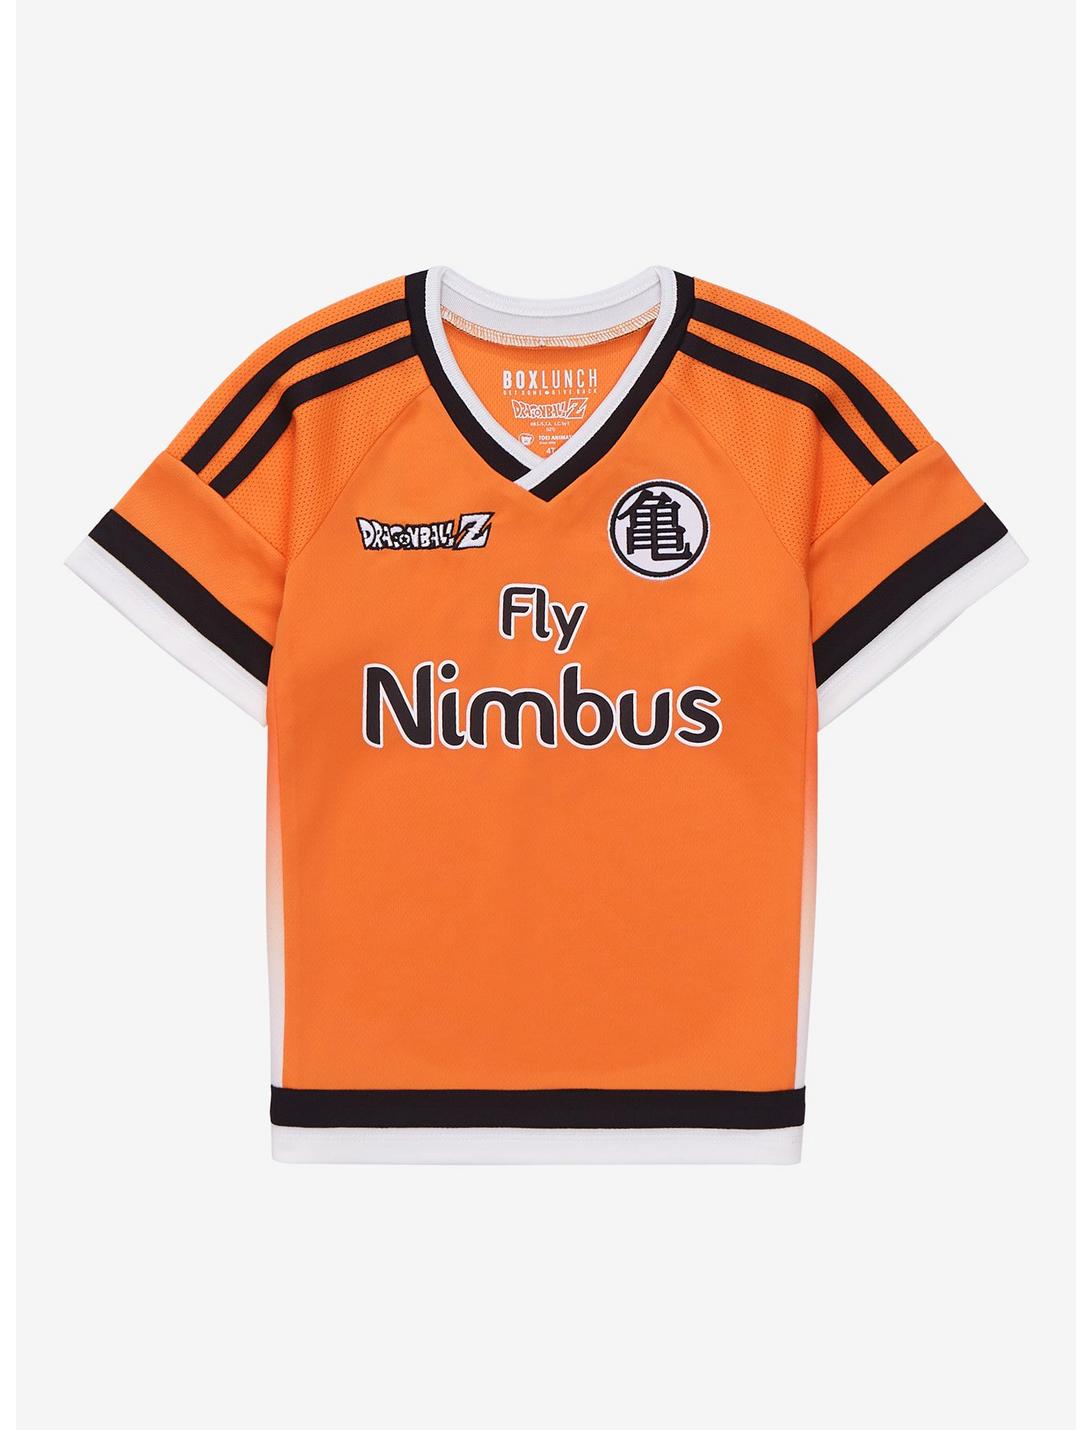 PENDING APPROVAL - Dragon Ball Z Goku Fly Nimbus Toddler Soccer Jersey - BoxLunch Exclusive, ORANGE, hi-res